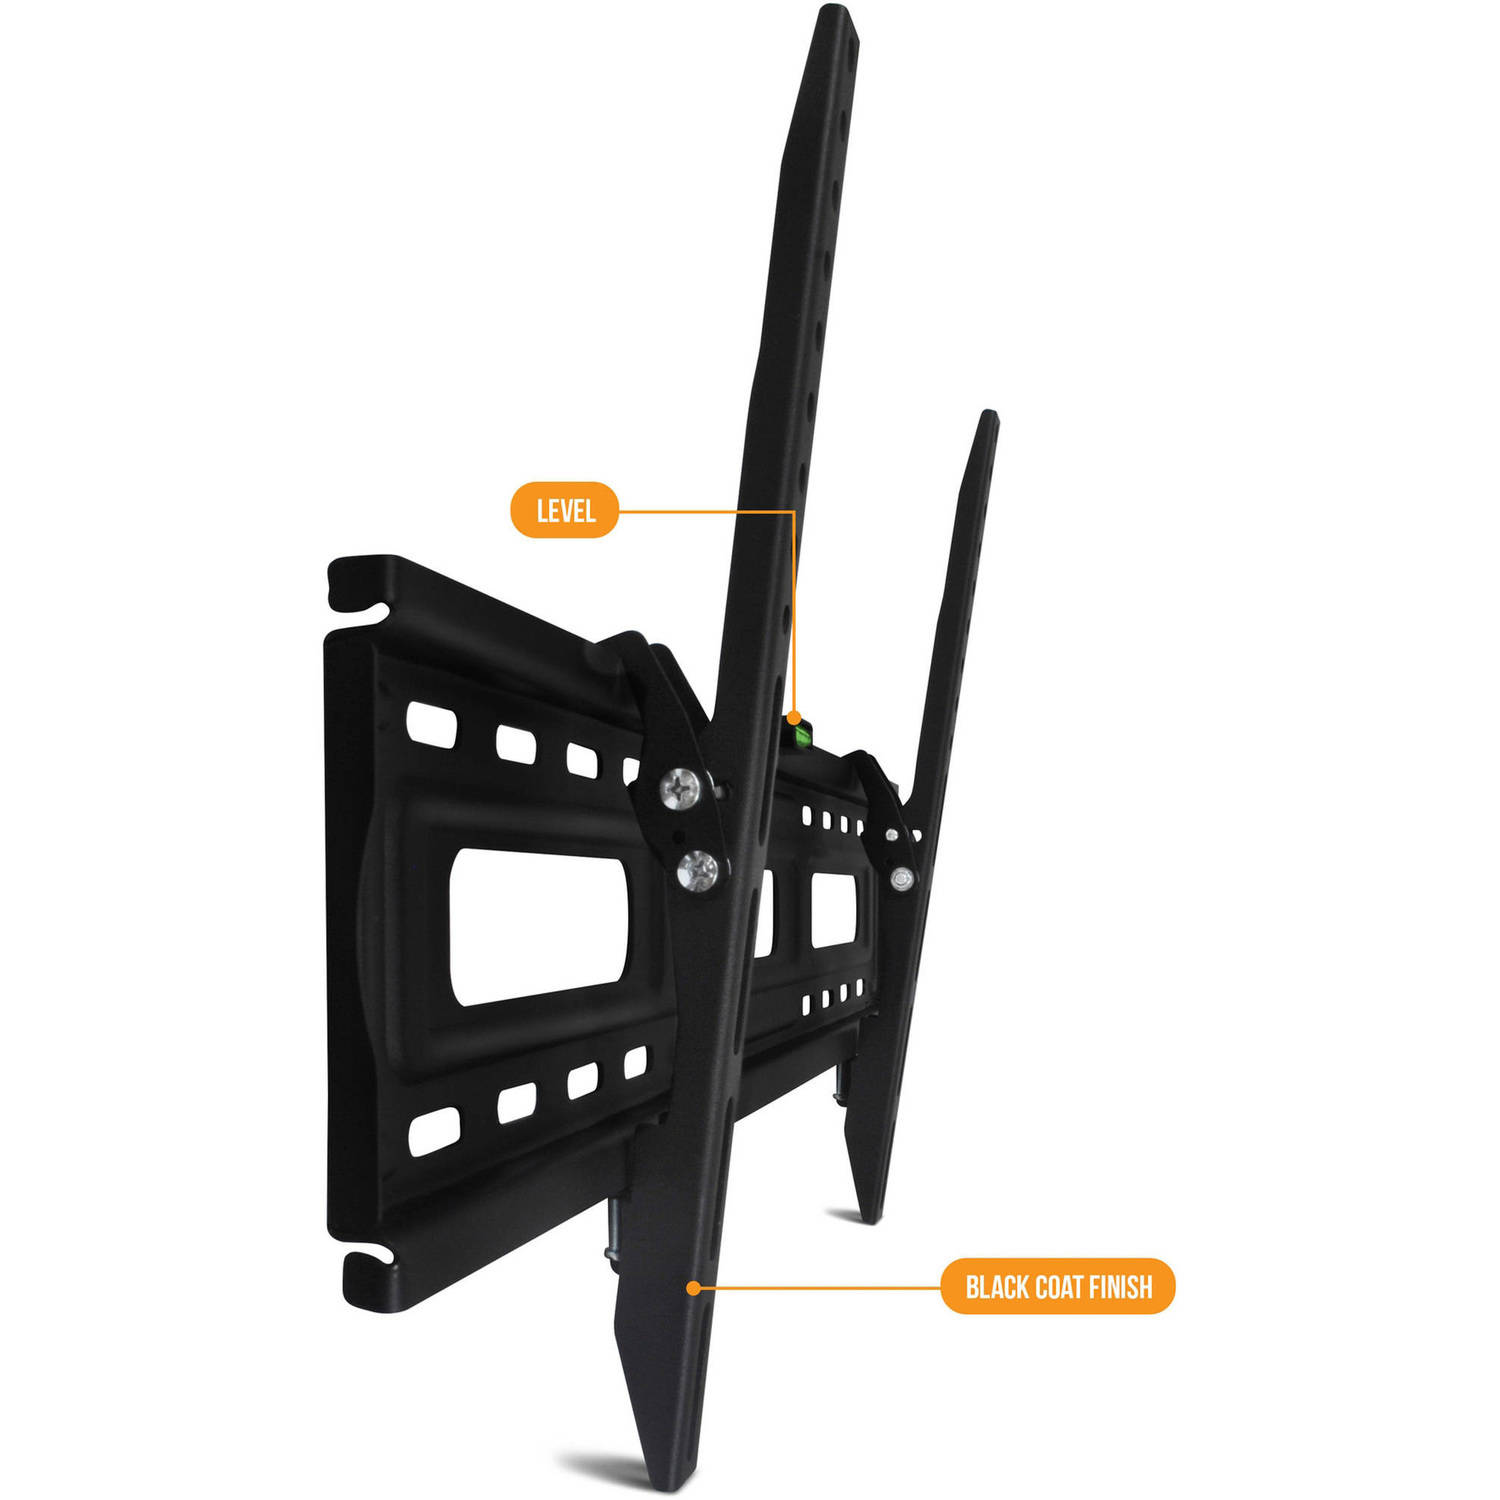 DuraPro Tilting Wall Mount Kit for 24" to 84" TVs + Bonus HDMI Cable (DRP790TT) - image 2 of 8